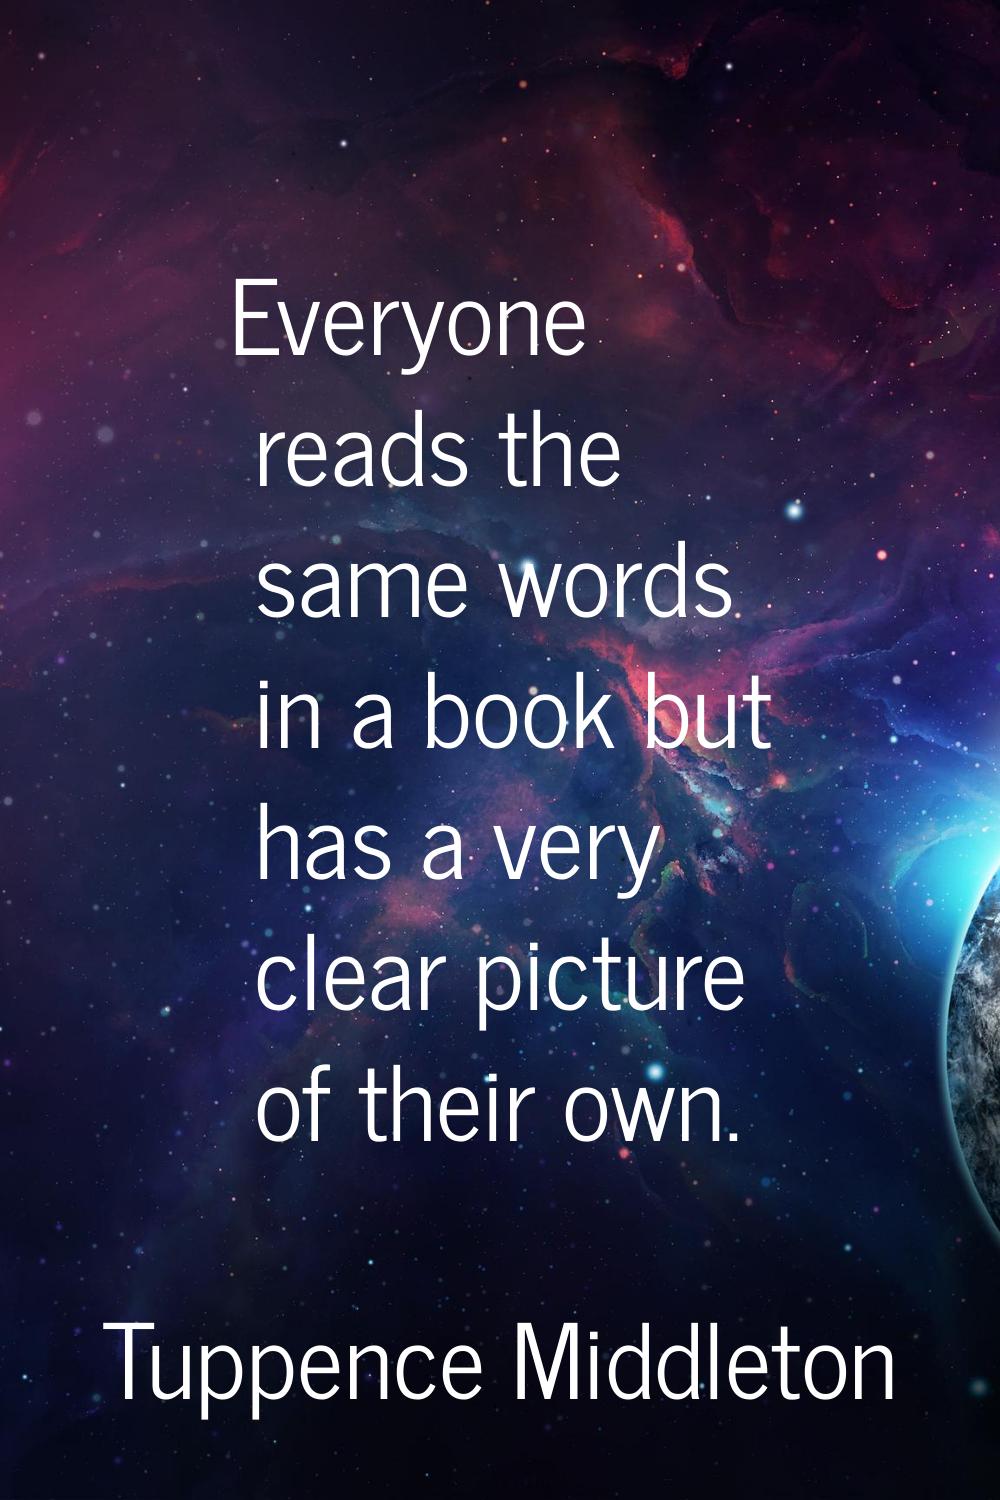 Everyone reads the same words in a book but has a very clear picture of their own.